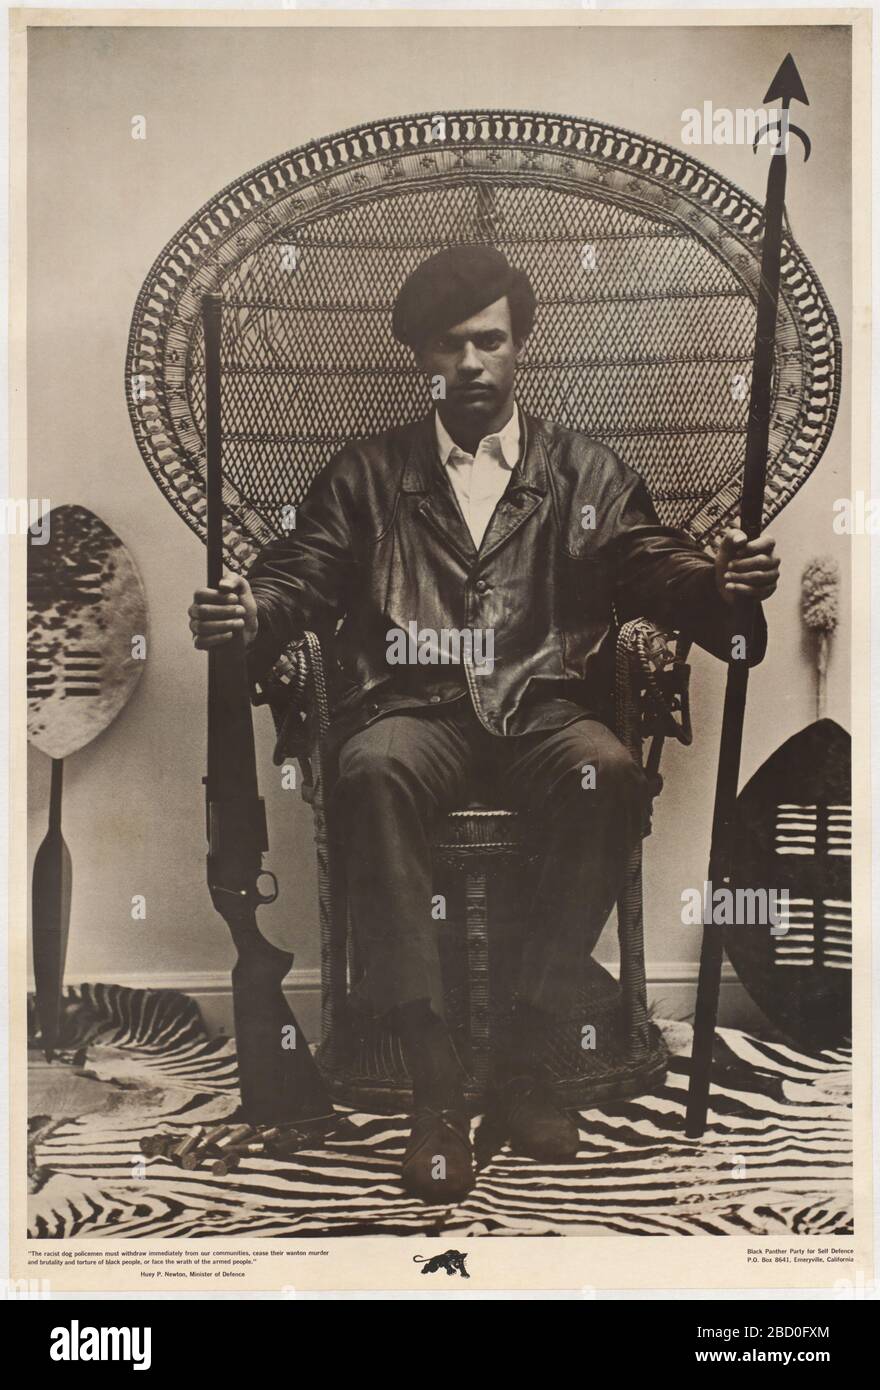 Huey Newton Black Panther Minister of Defense. A poster of Huey Newton  sitting in a rattan throne chair wearing a beret and a black leather jacket  while holding a rifle in his